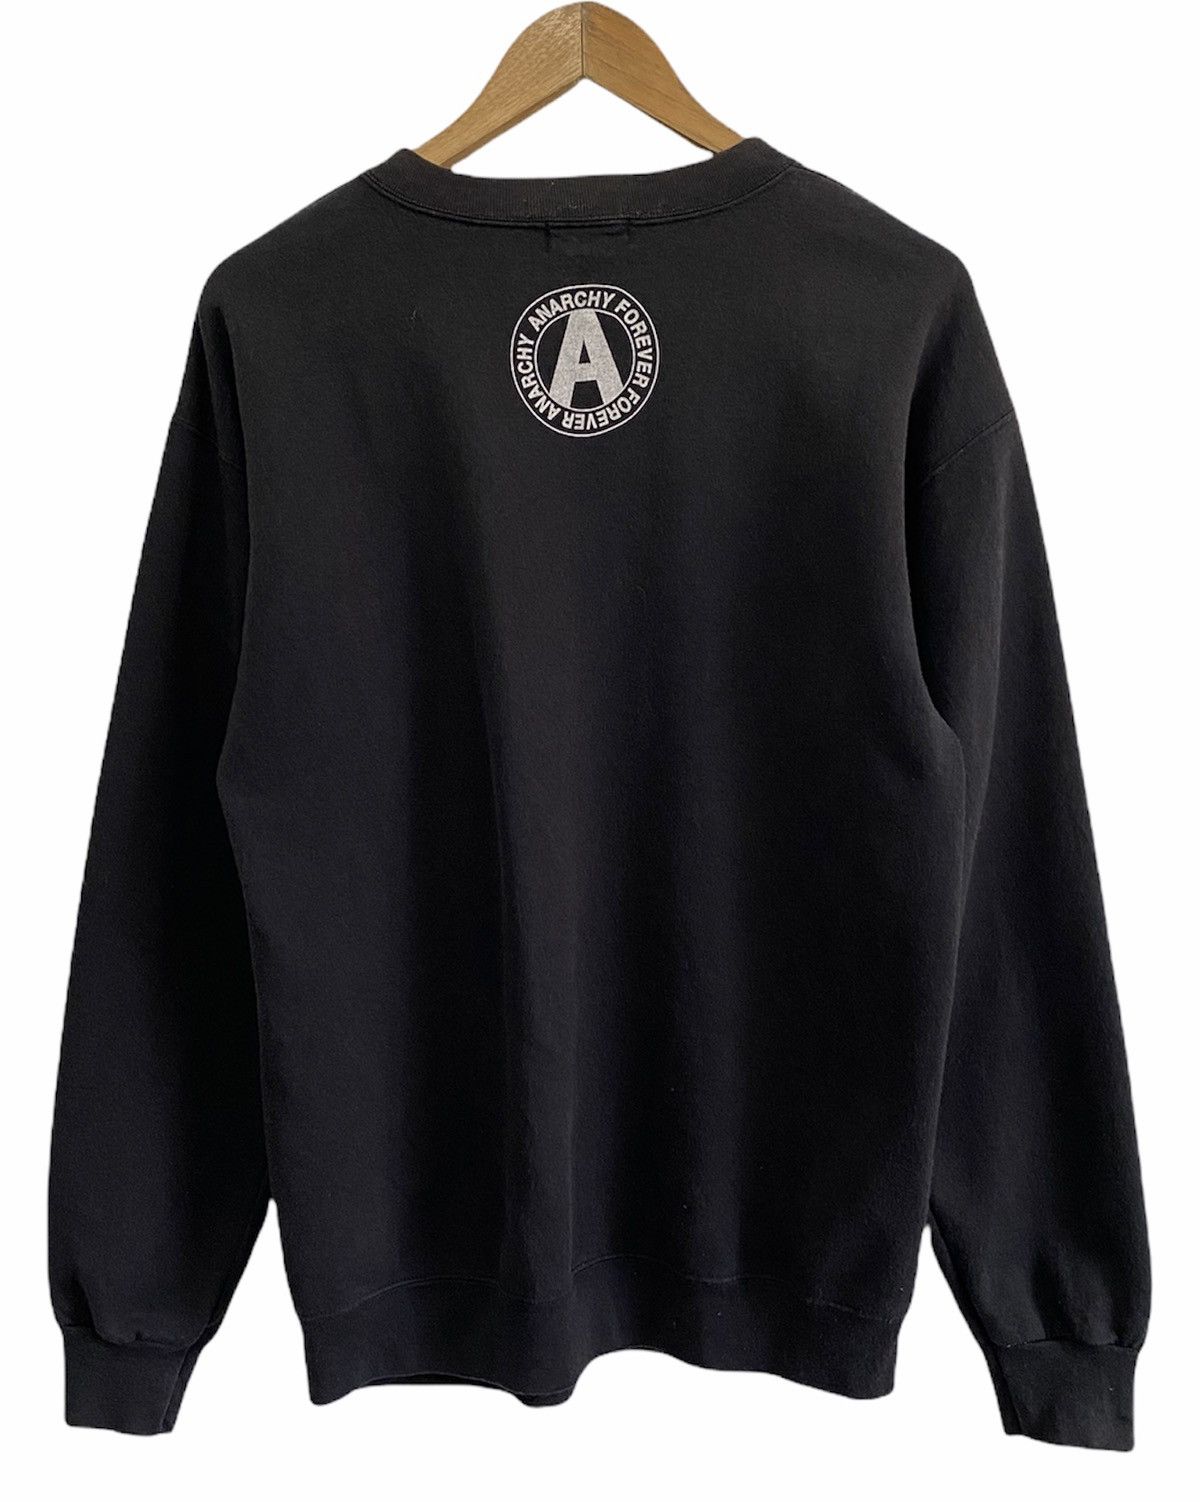 Undercover AFFA ANARCHY FOREVER FOREVER ANARCHY MADE IN USA SWEATSHIRT Size US S / EU 44-46 / 1 - 3 Thumbnail